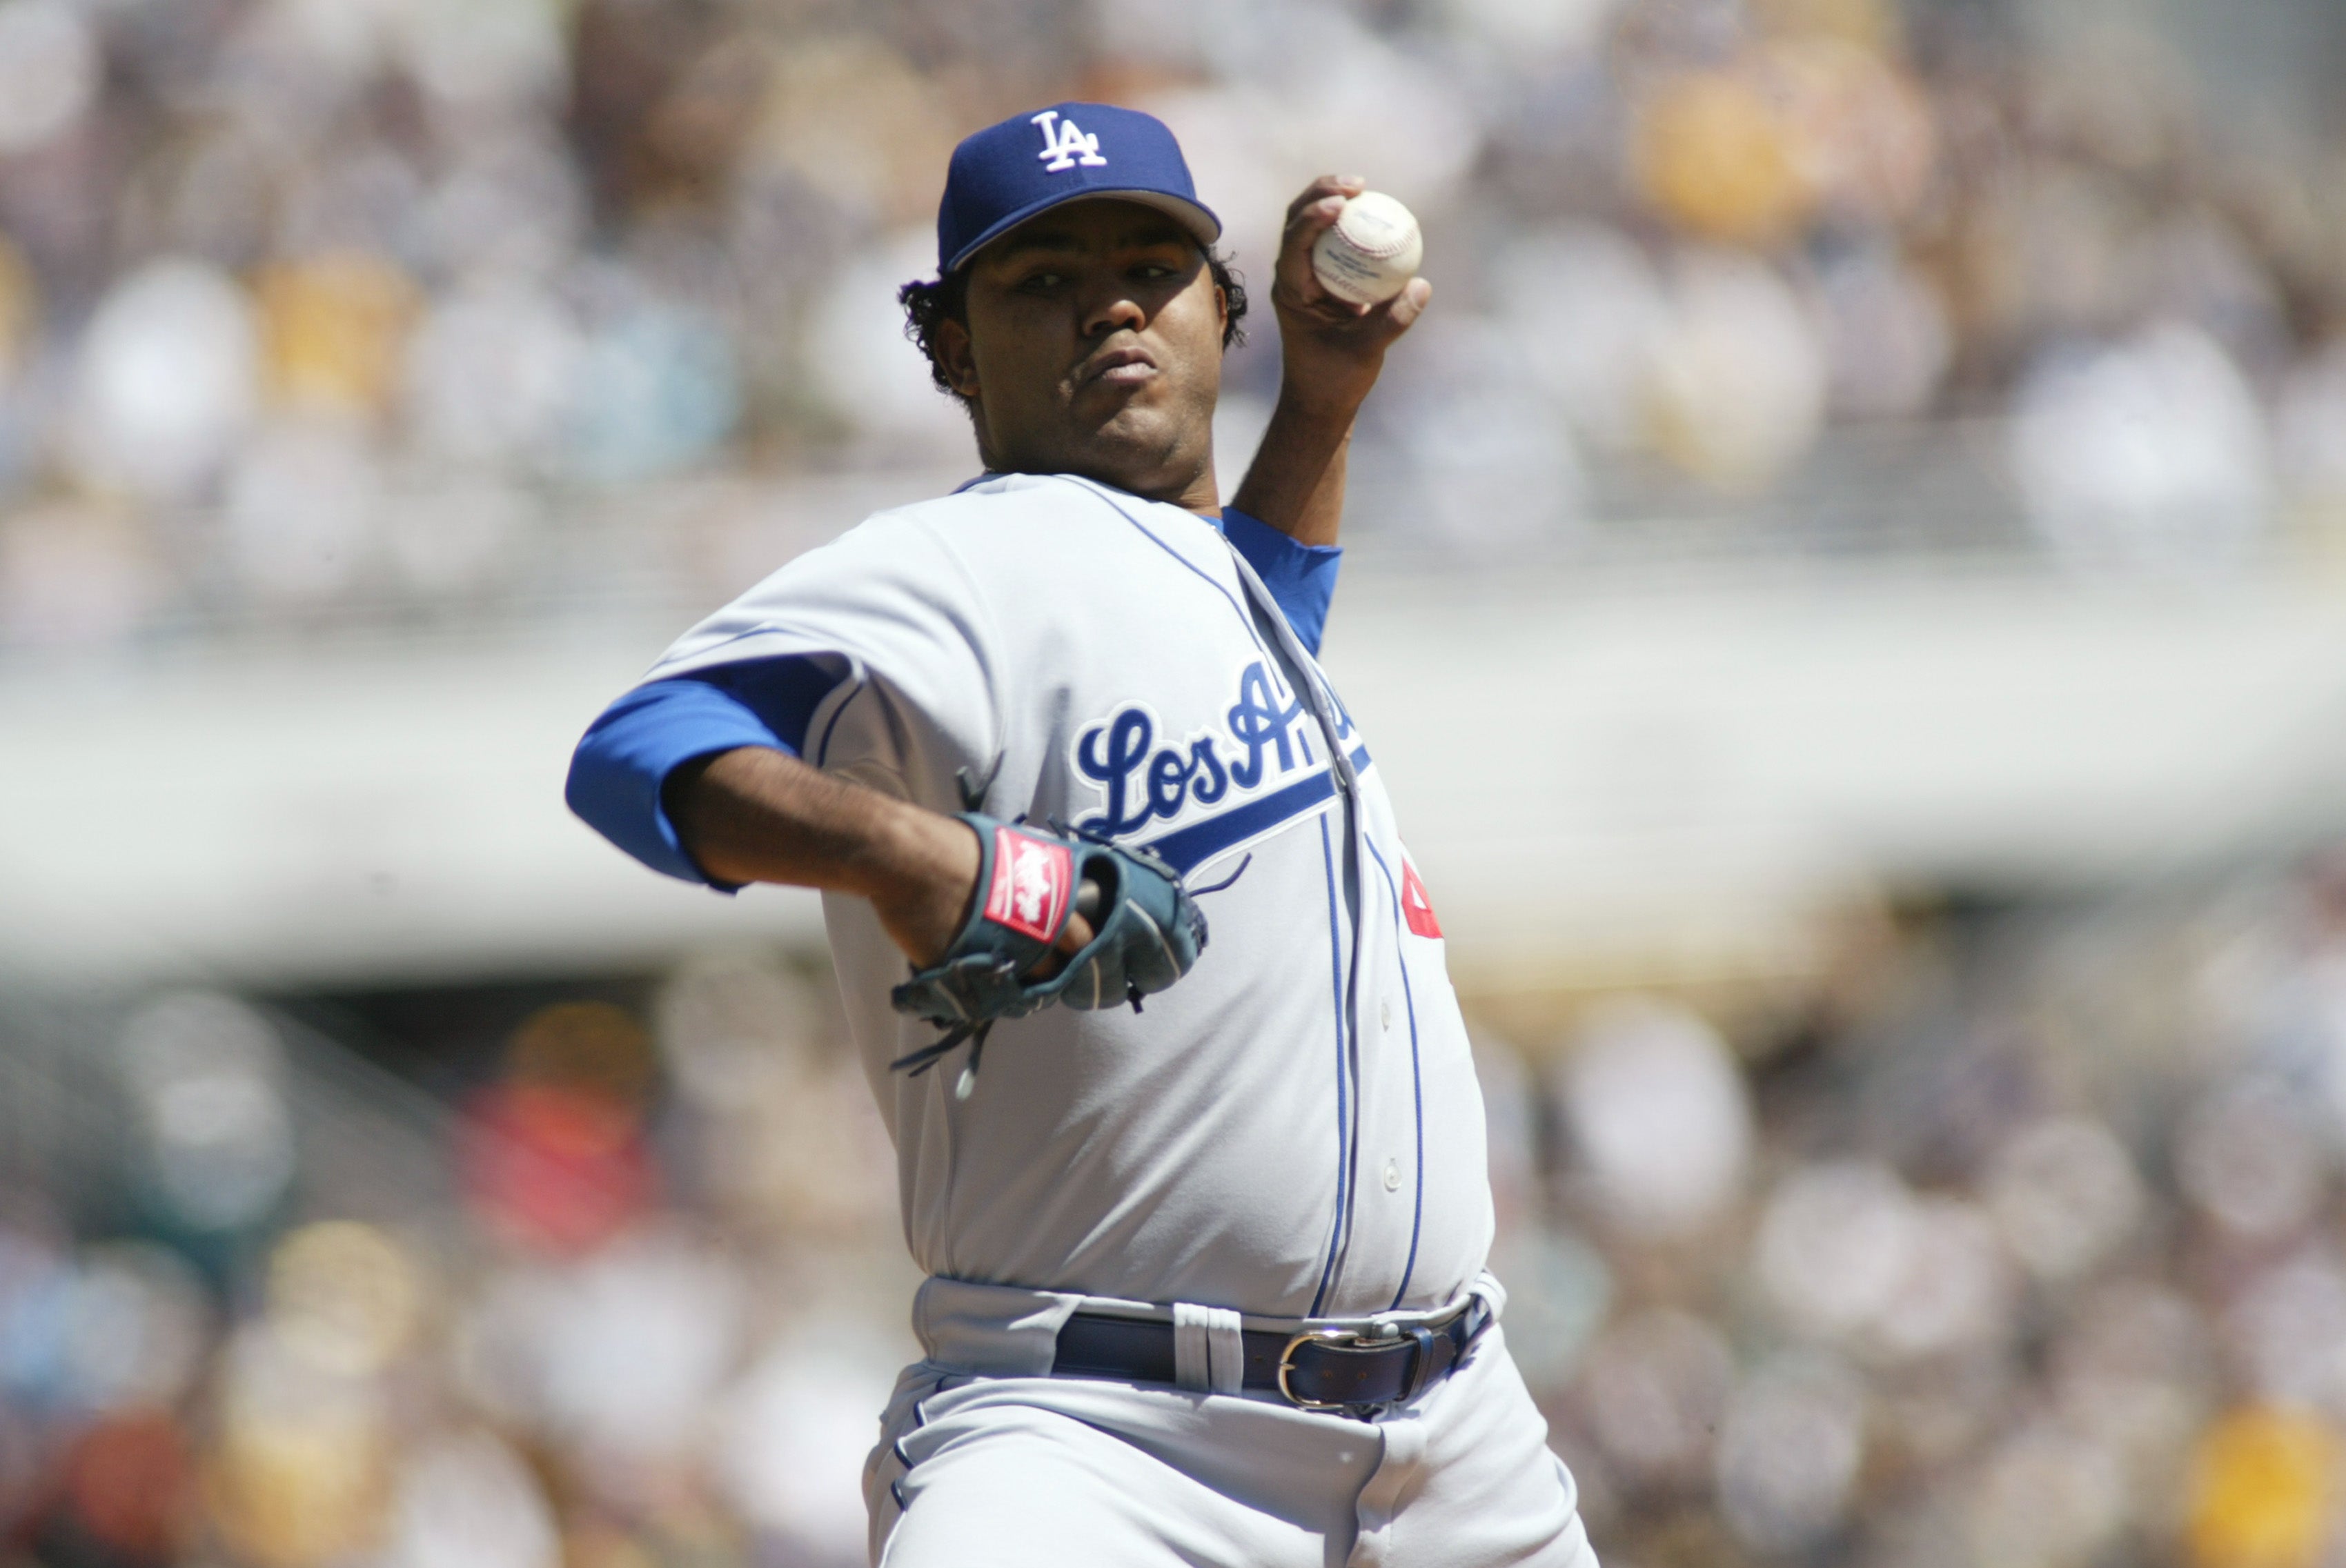 Former MLB pitcher Odalis Perez dies in accidental fall from ladder